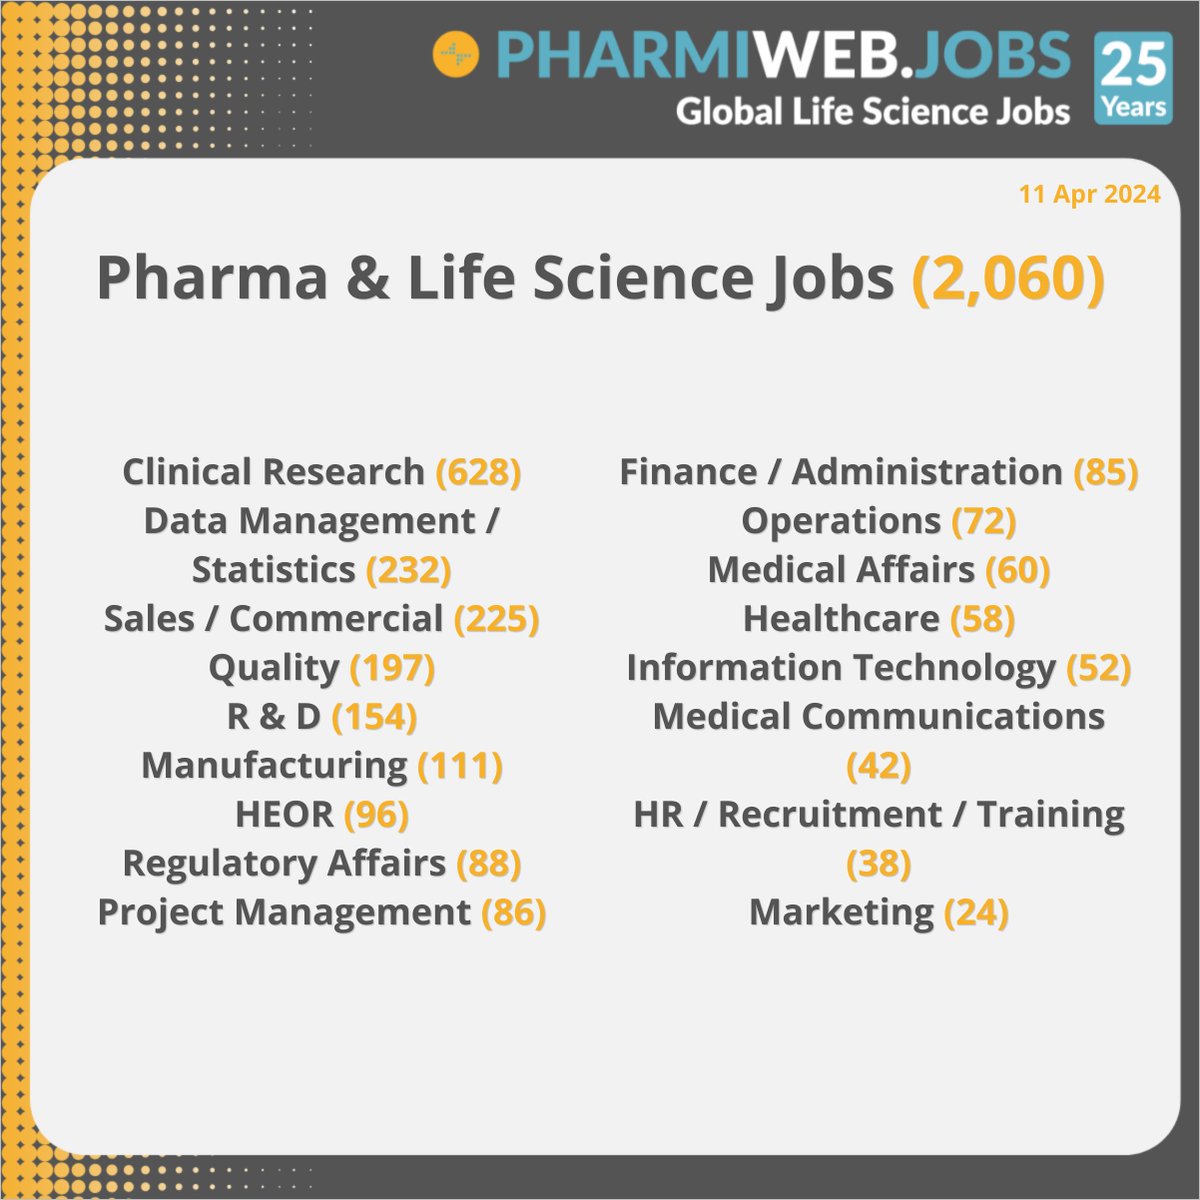 2,060 Pharma & Life Science Jobs Today Search Now - buff.ly/3PWIHQh Register & Upload Your CV Now! buff.ly/3QlVnAz #Pharma #Biotech #ClinicalResearch #LifeSciences #MedicalDevices #Biotechnology #PharmaJobs #PharmiWeb